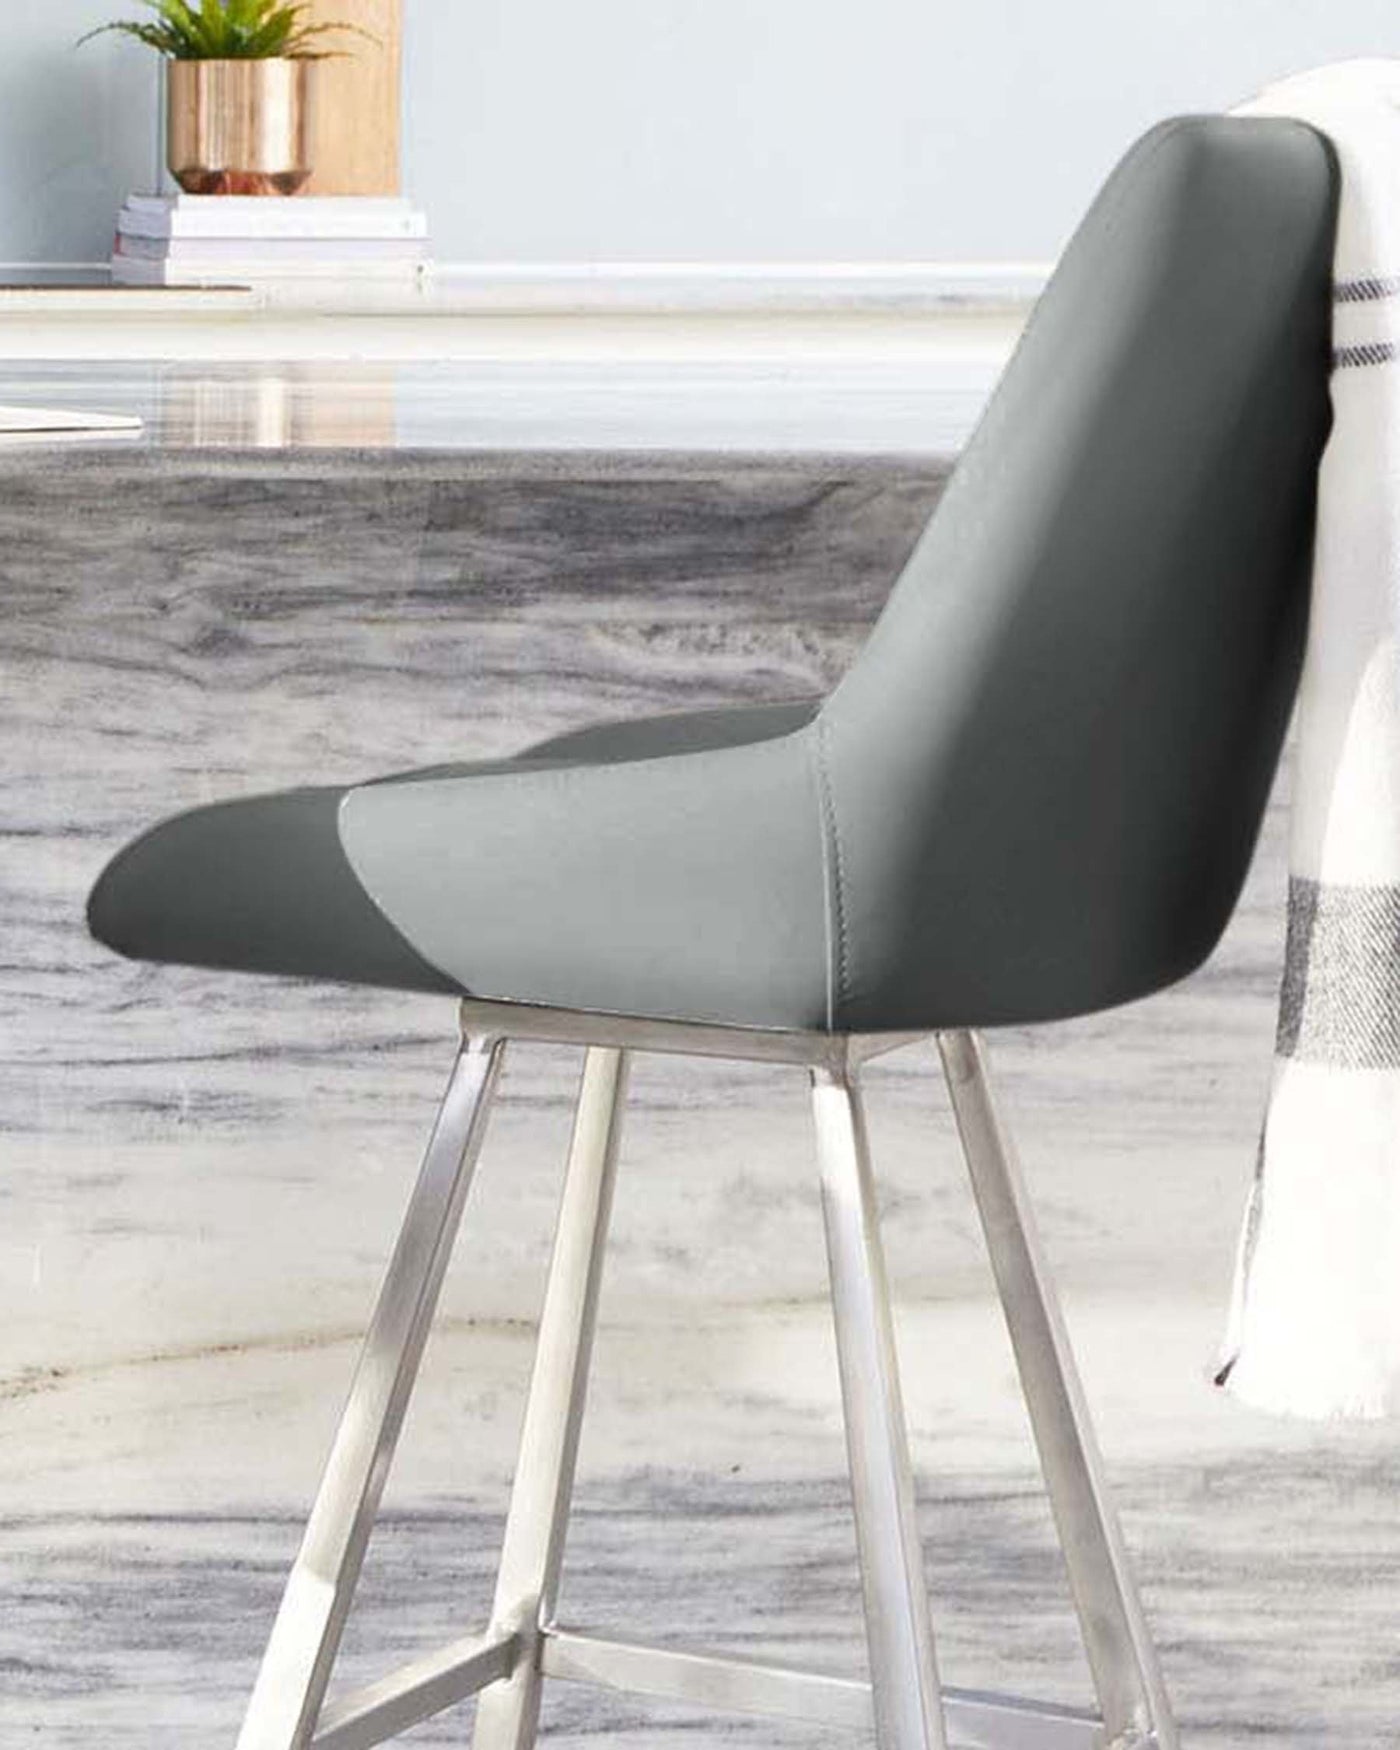 Modern grey upholstered bar stool with a sleek silhouette and metallic silver legs.